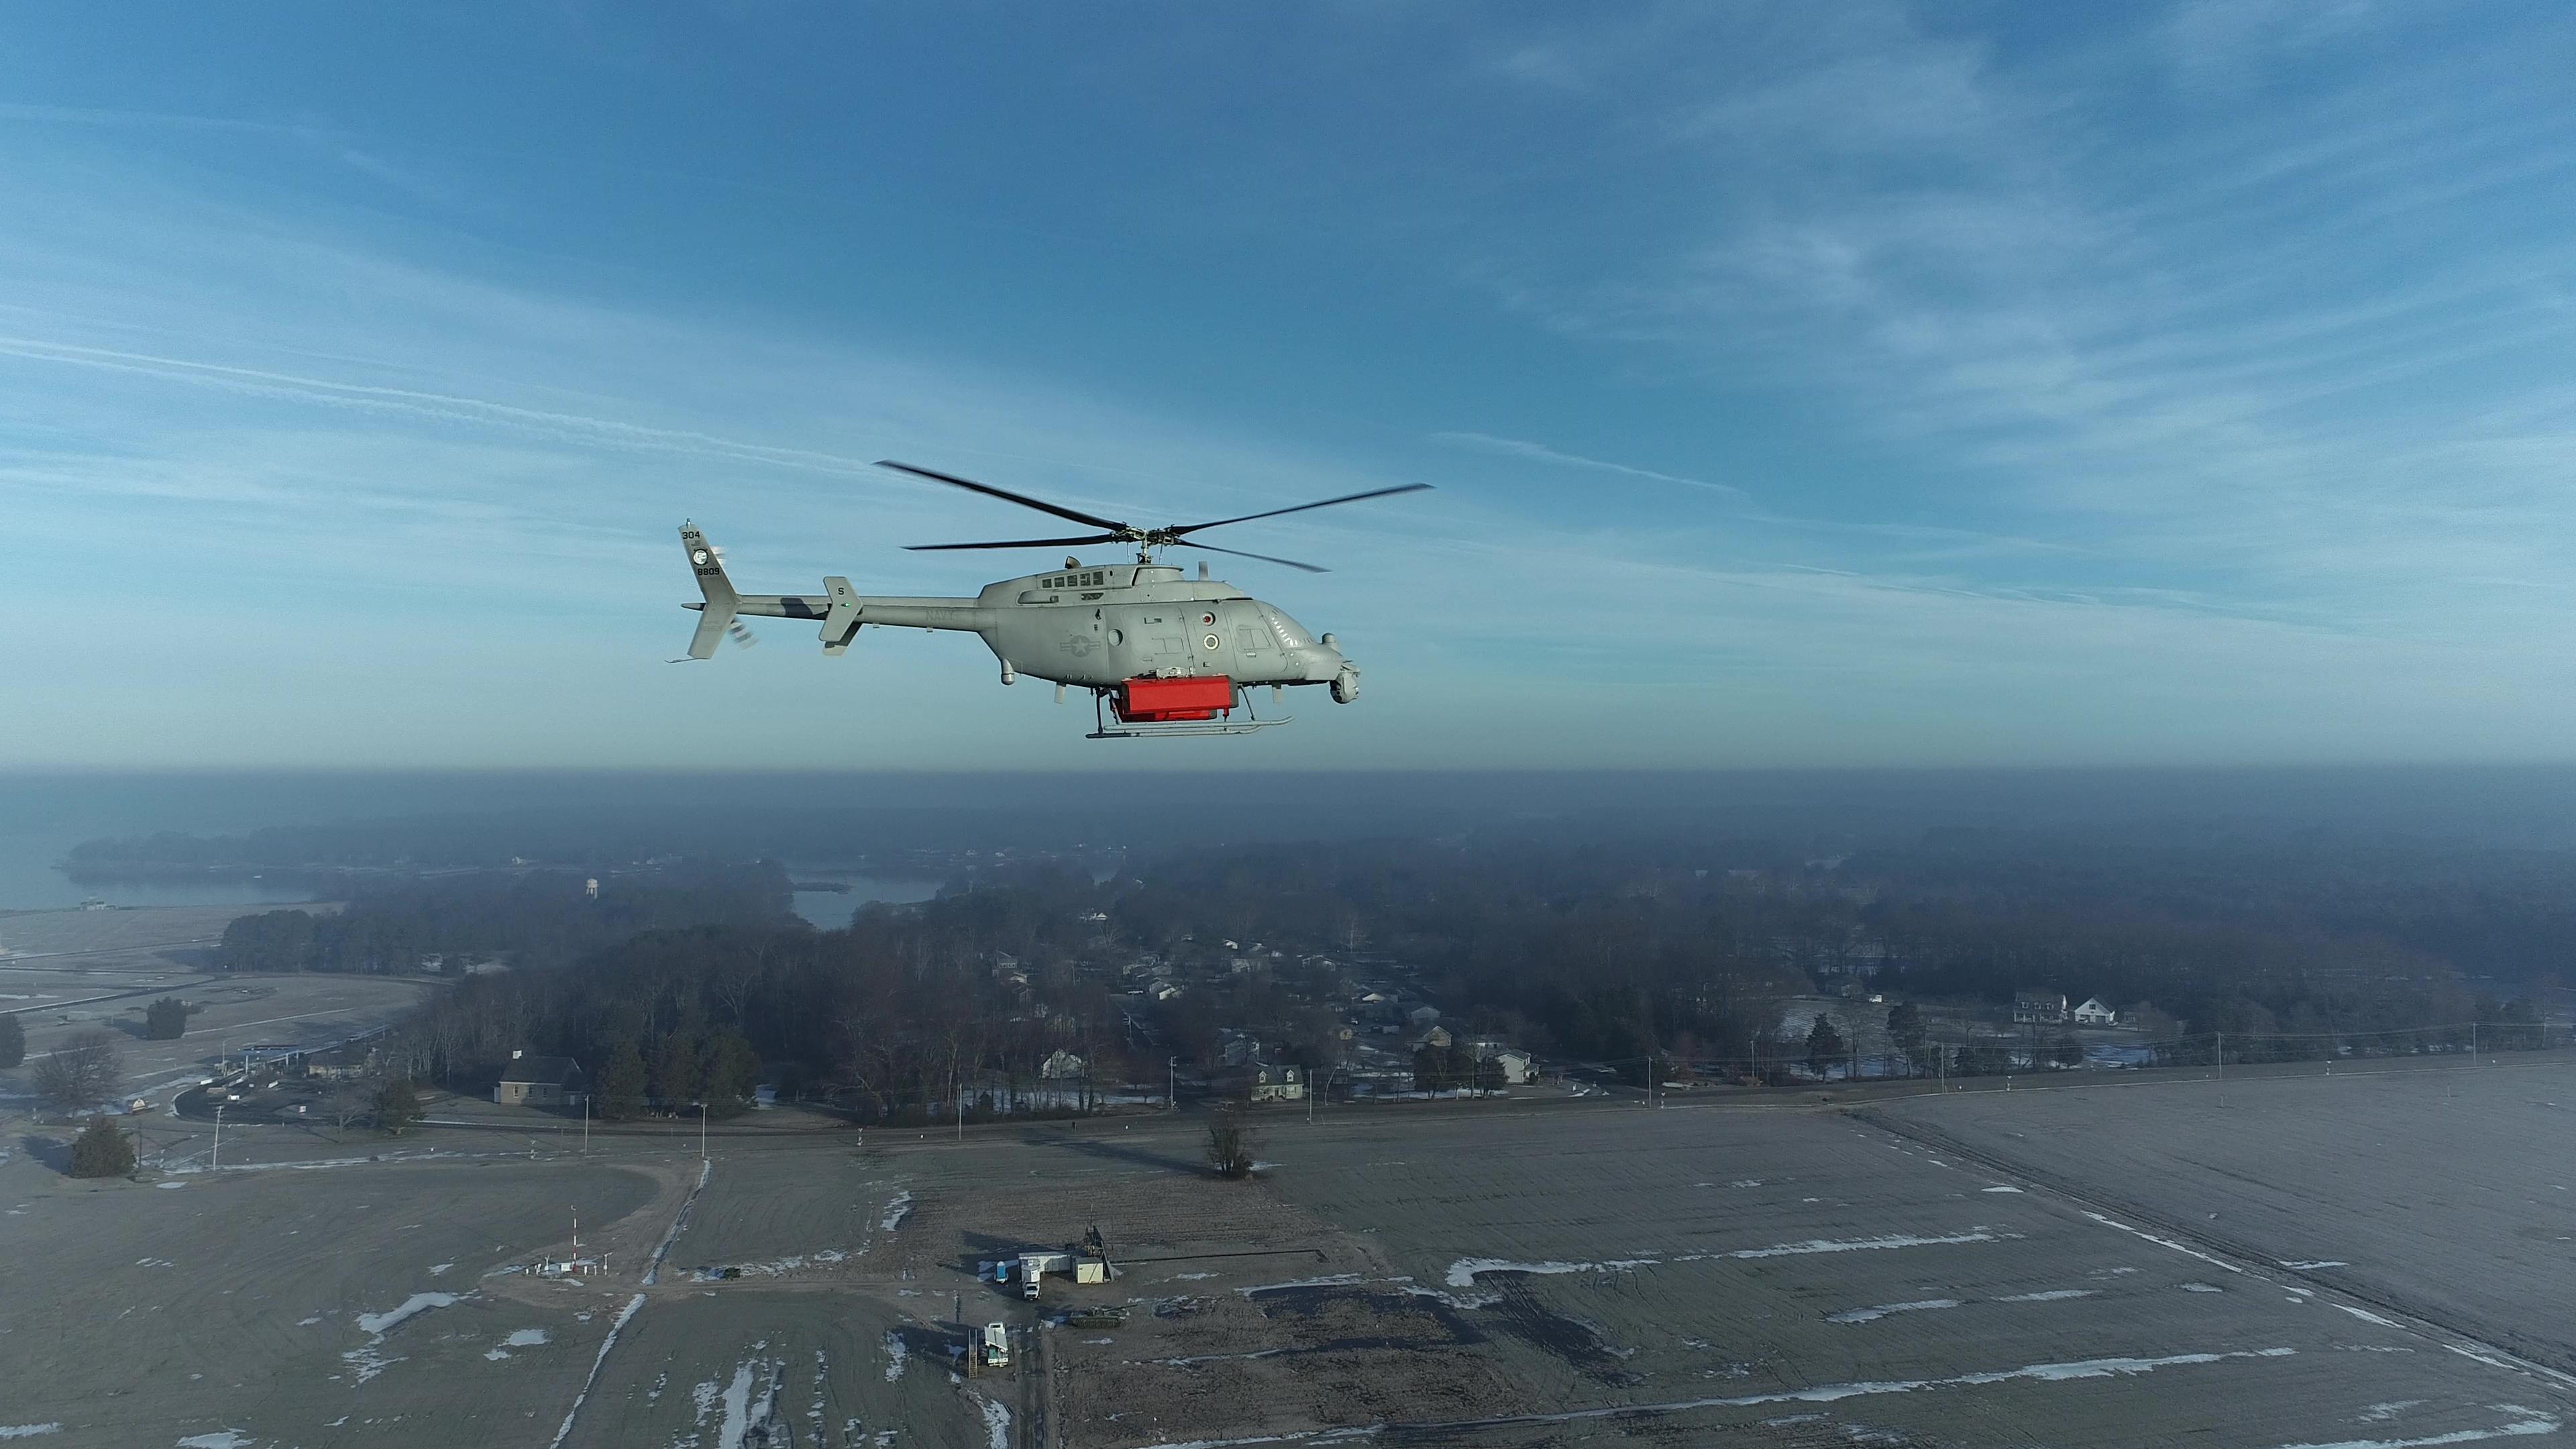 Navy to demo new MQ-8 Fire Scout mine countermeasure system | NAVAIR